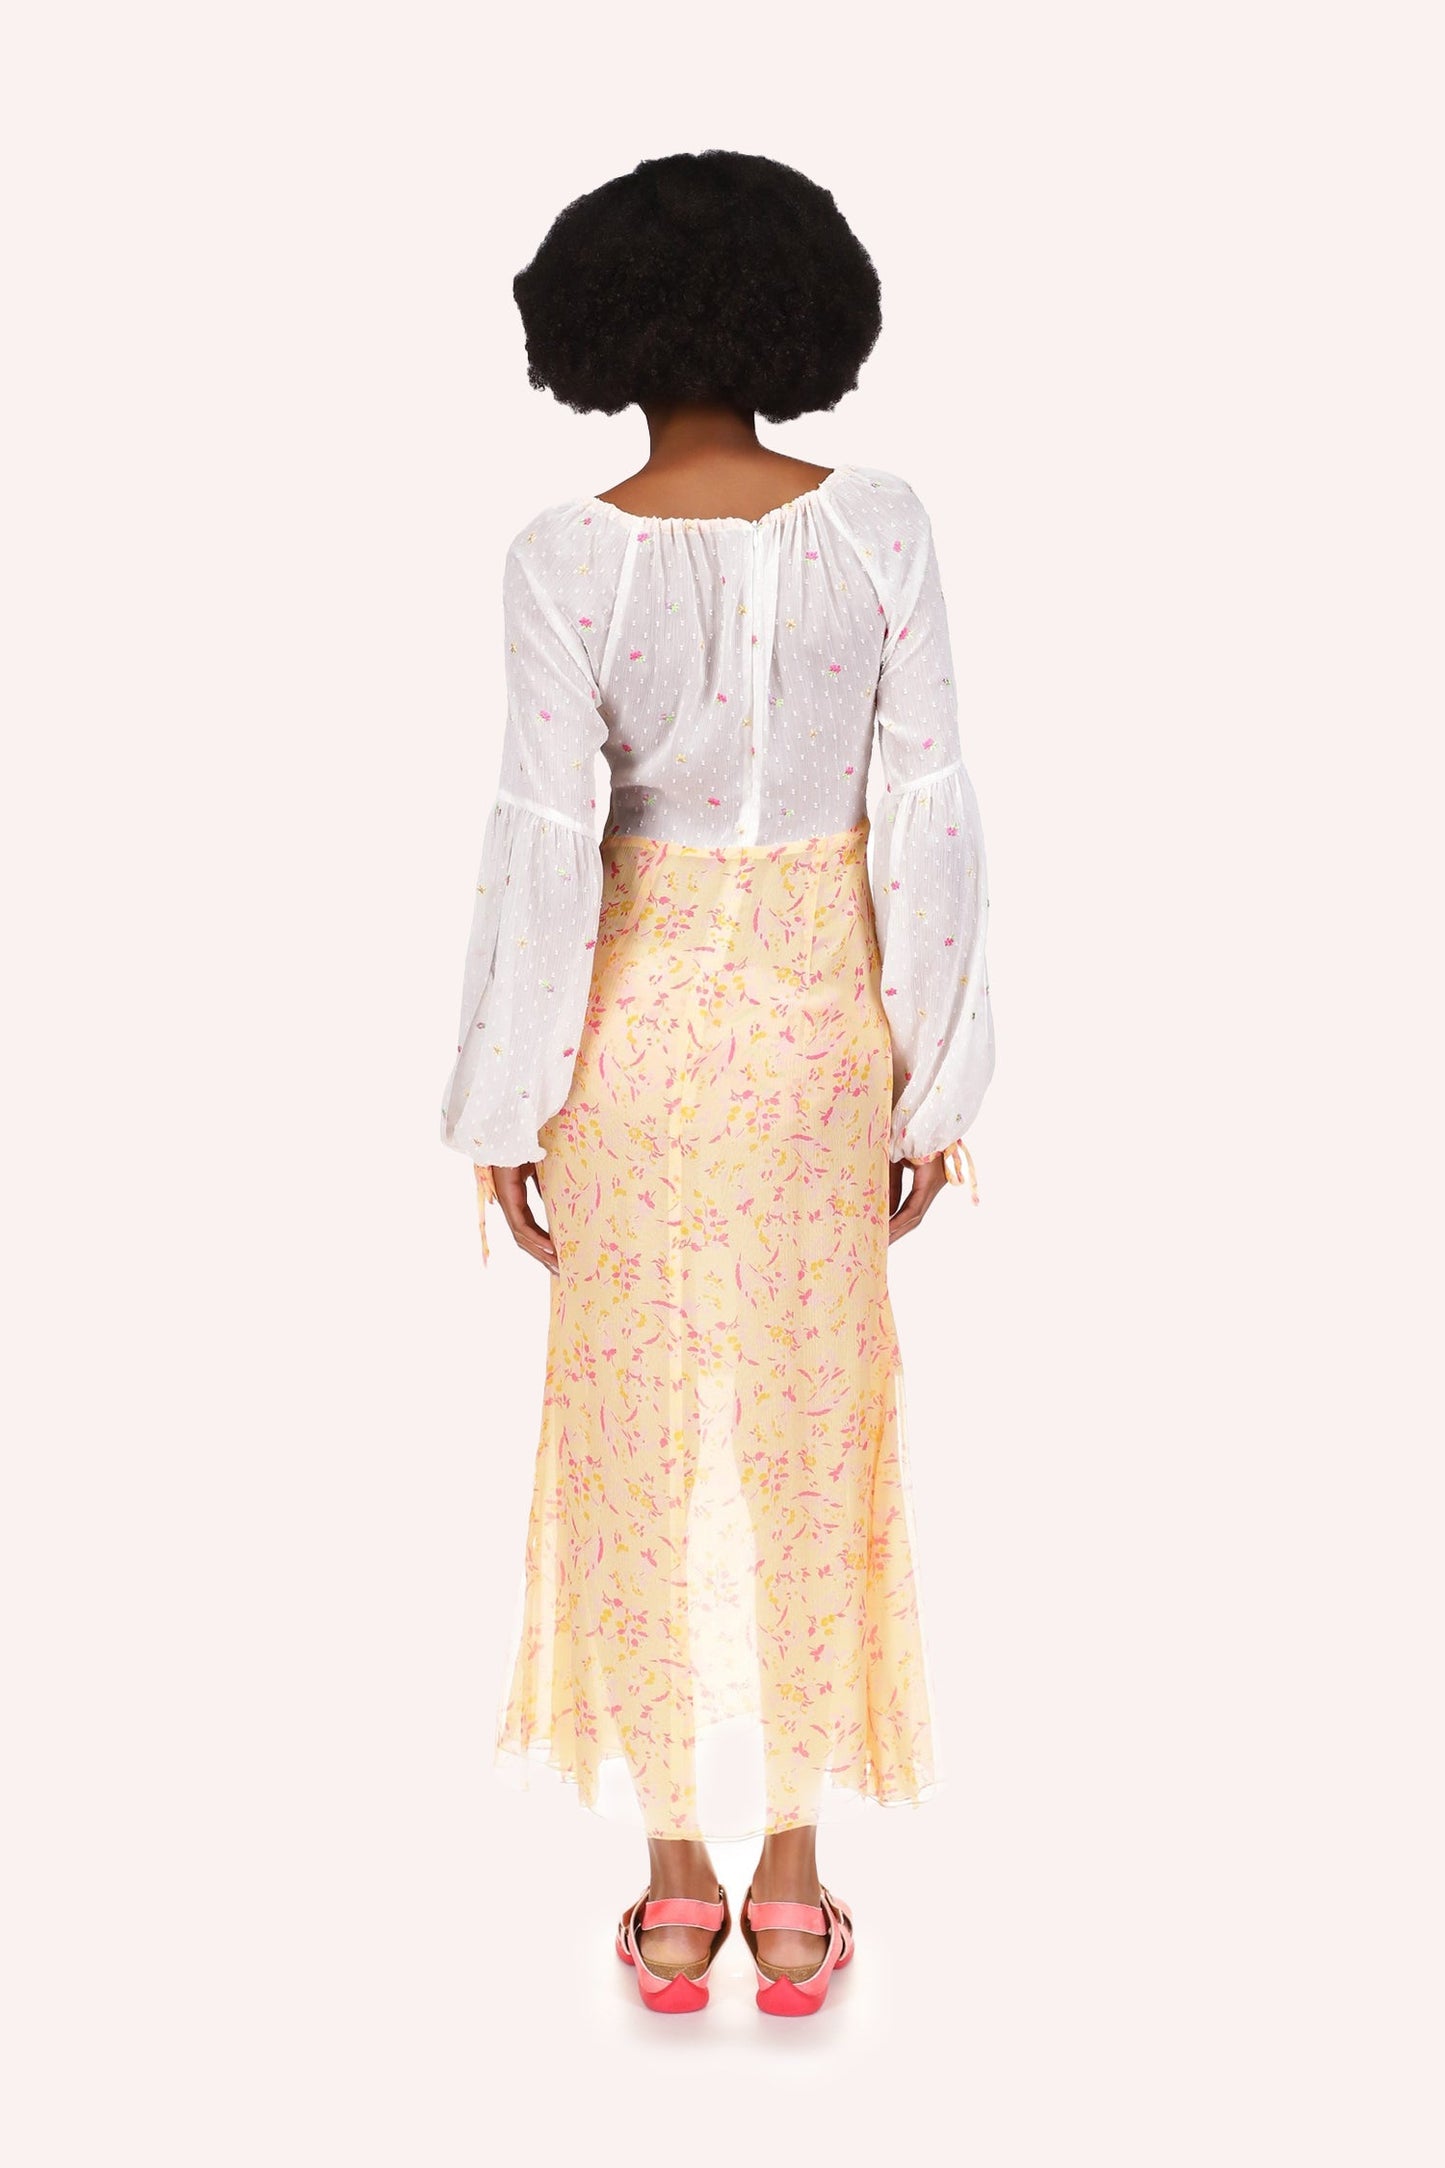 Long dress, from waist/down Arcadia Blossom see-thru color, top and sleeves white with red spots